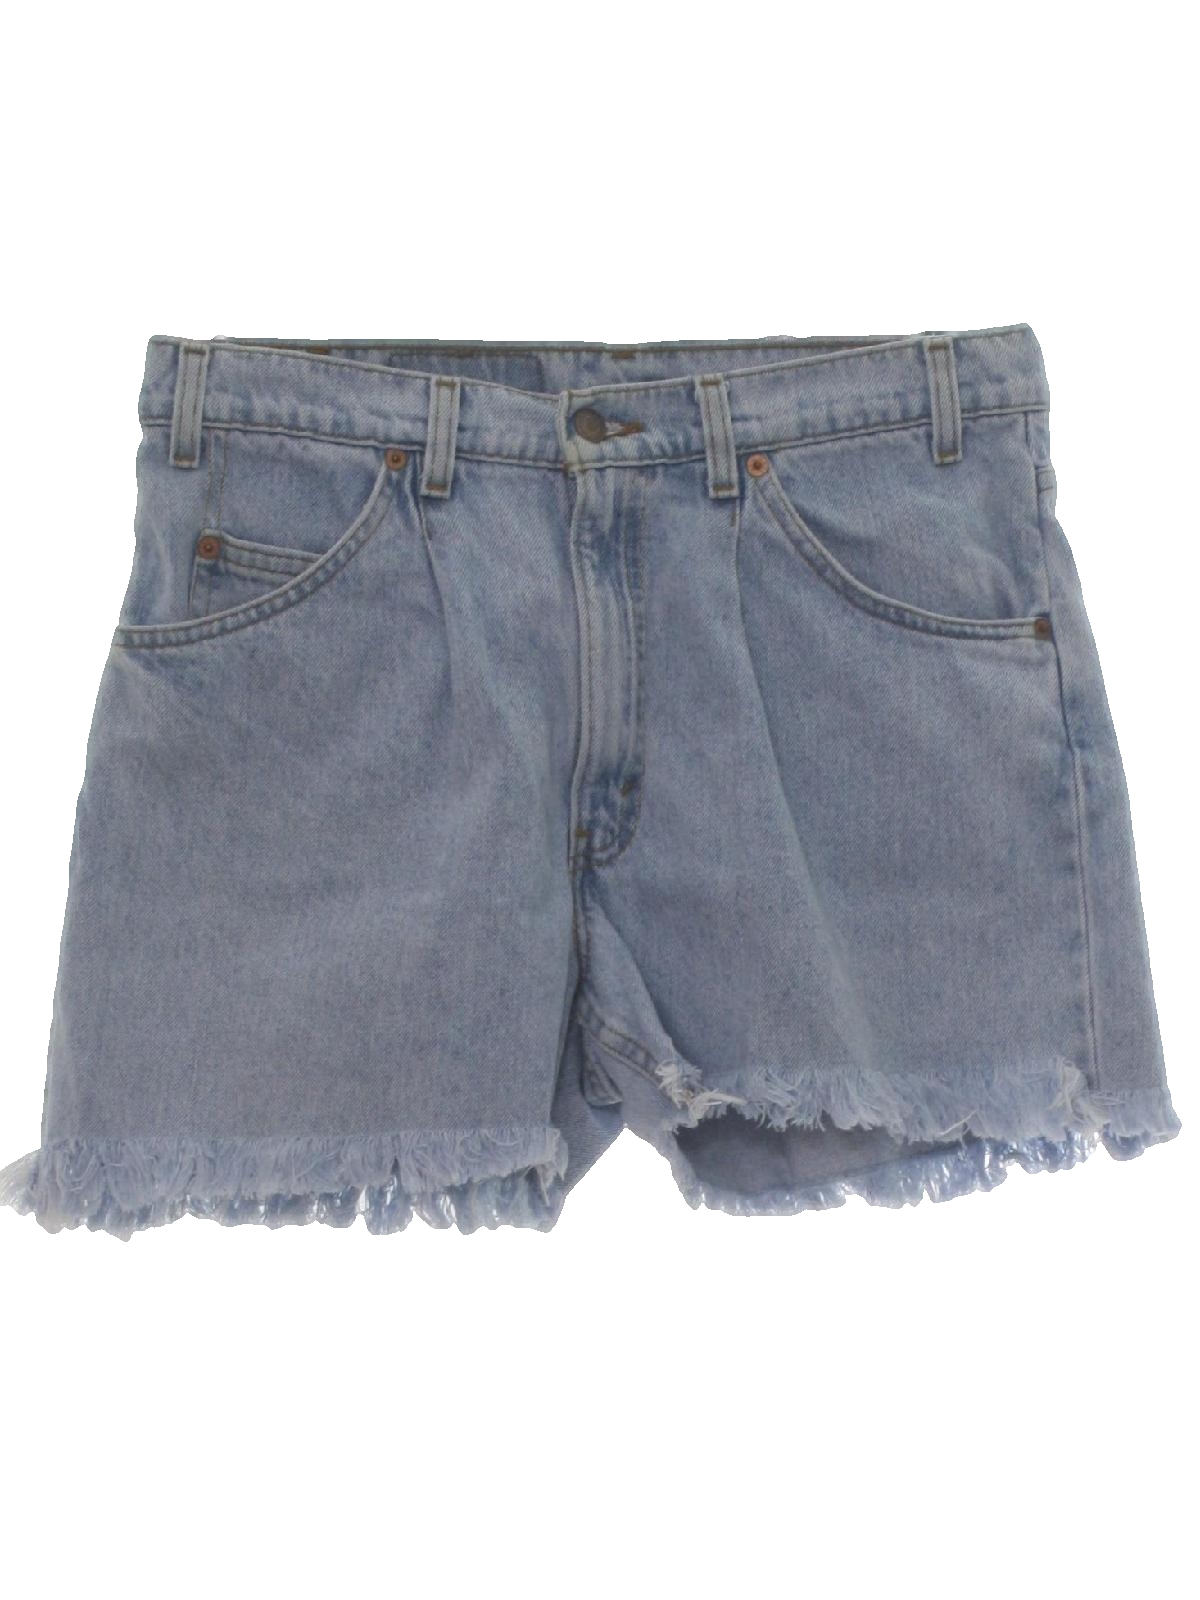 Retro 90's Shorts: 90s -Levis, Made in USA- Mens stonewashed blue ...